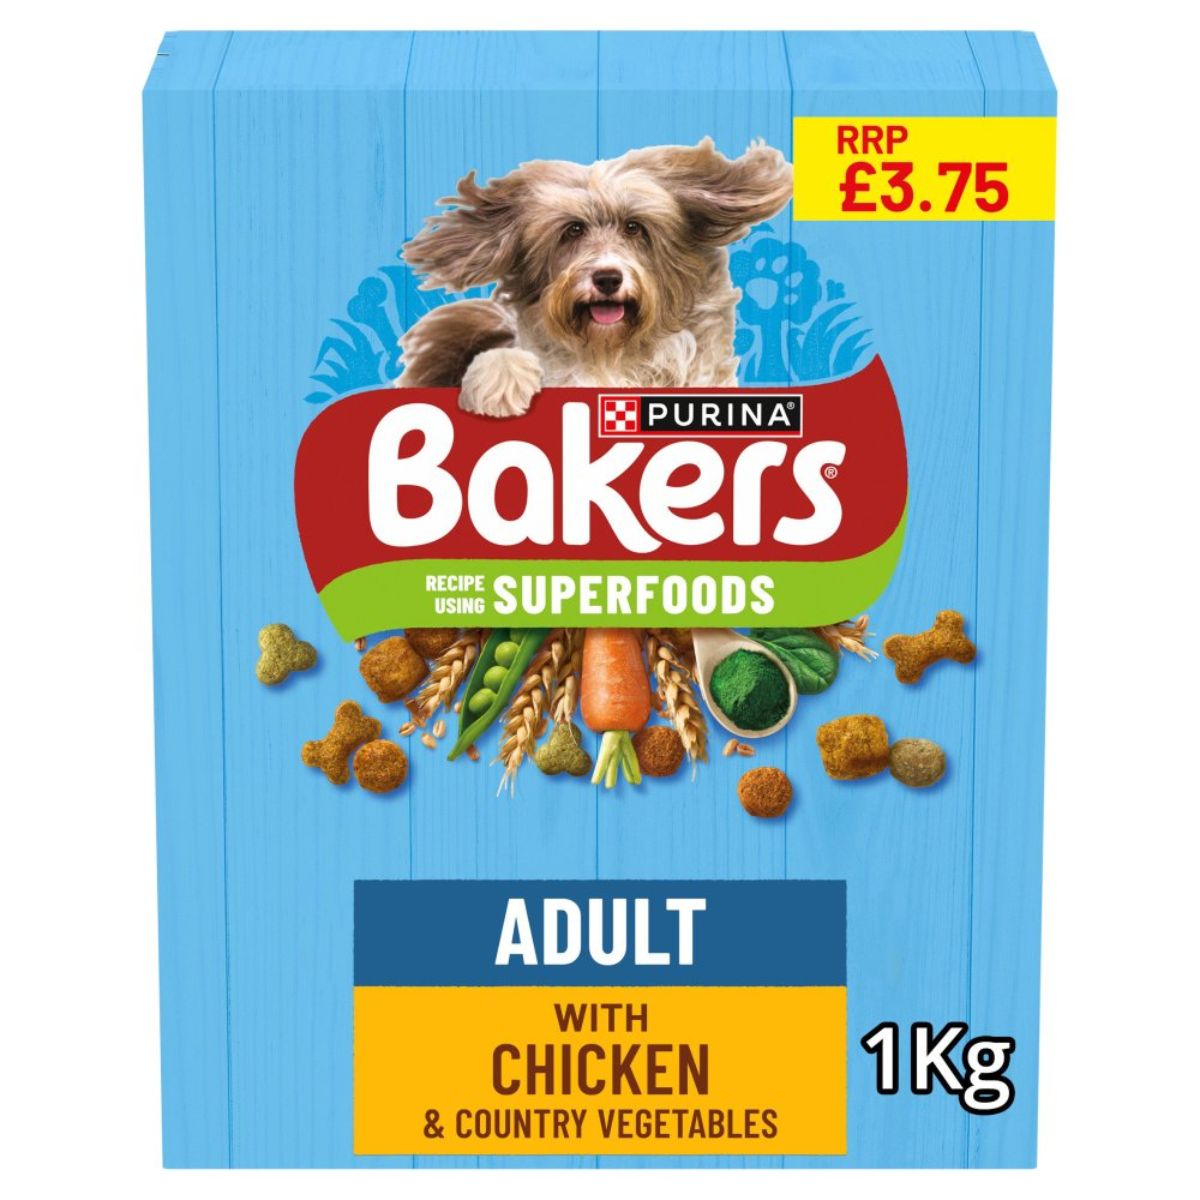 Bakers - Adult with Tasty Chicken & Country Vegetables - 1kg dog food.